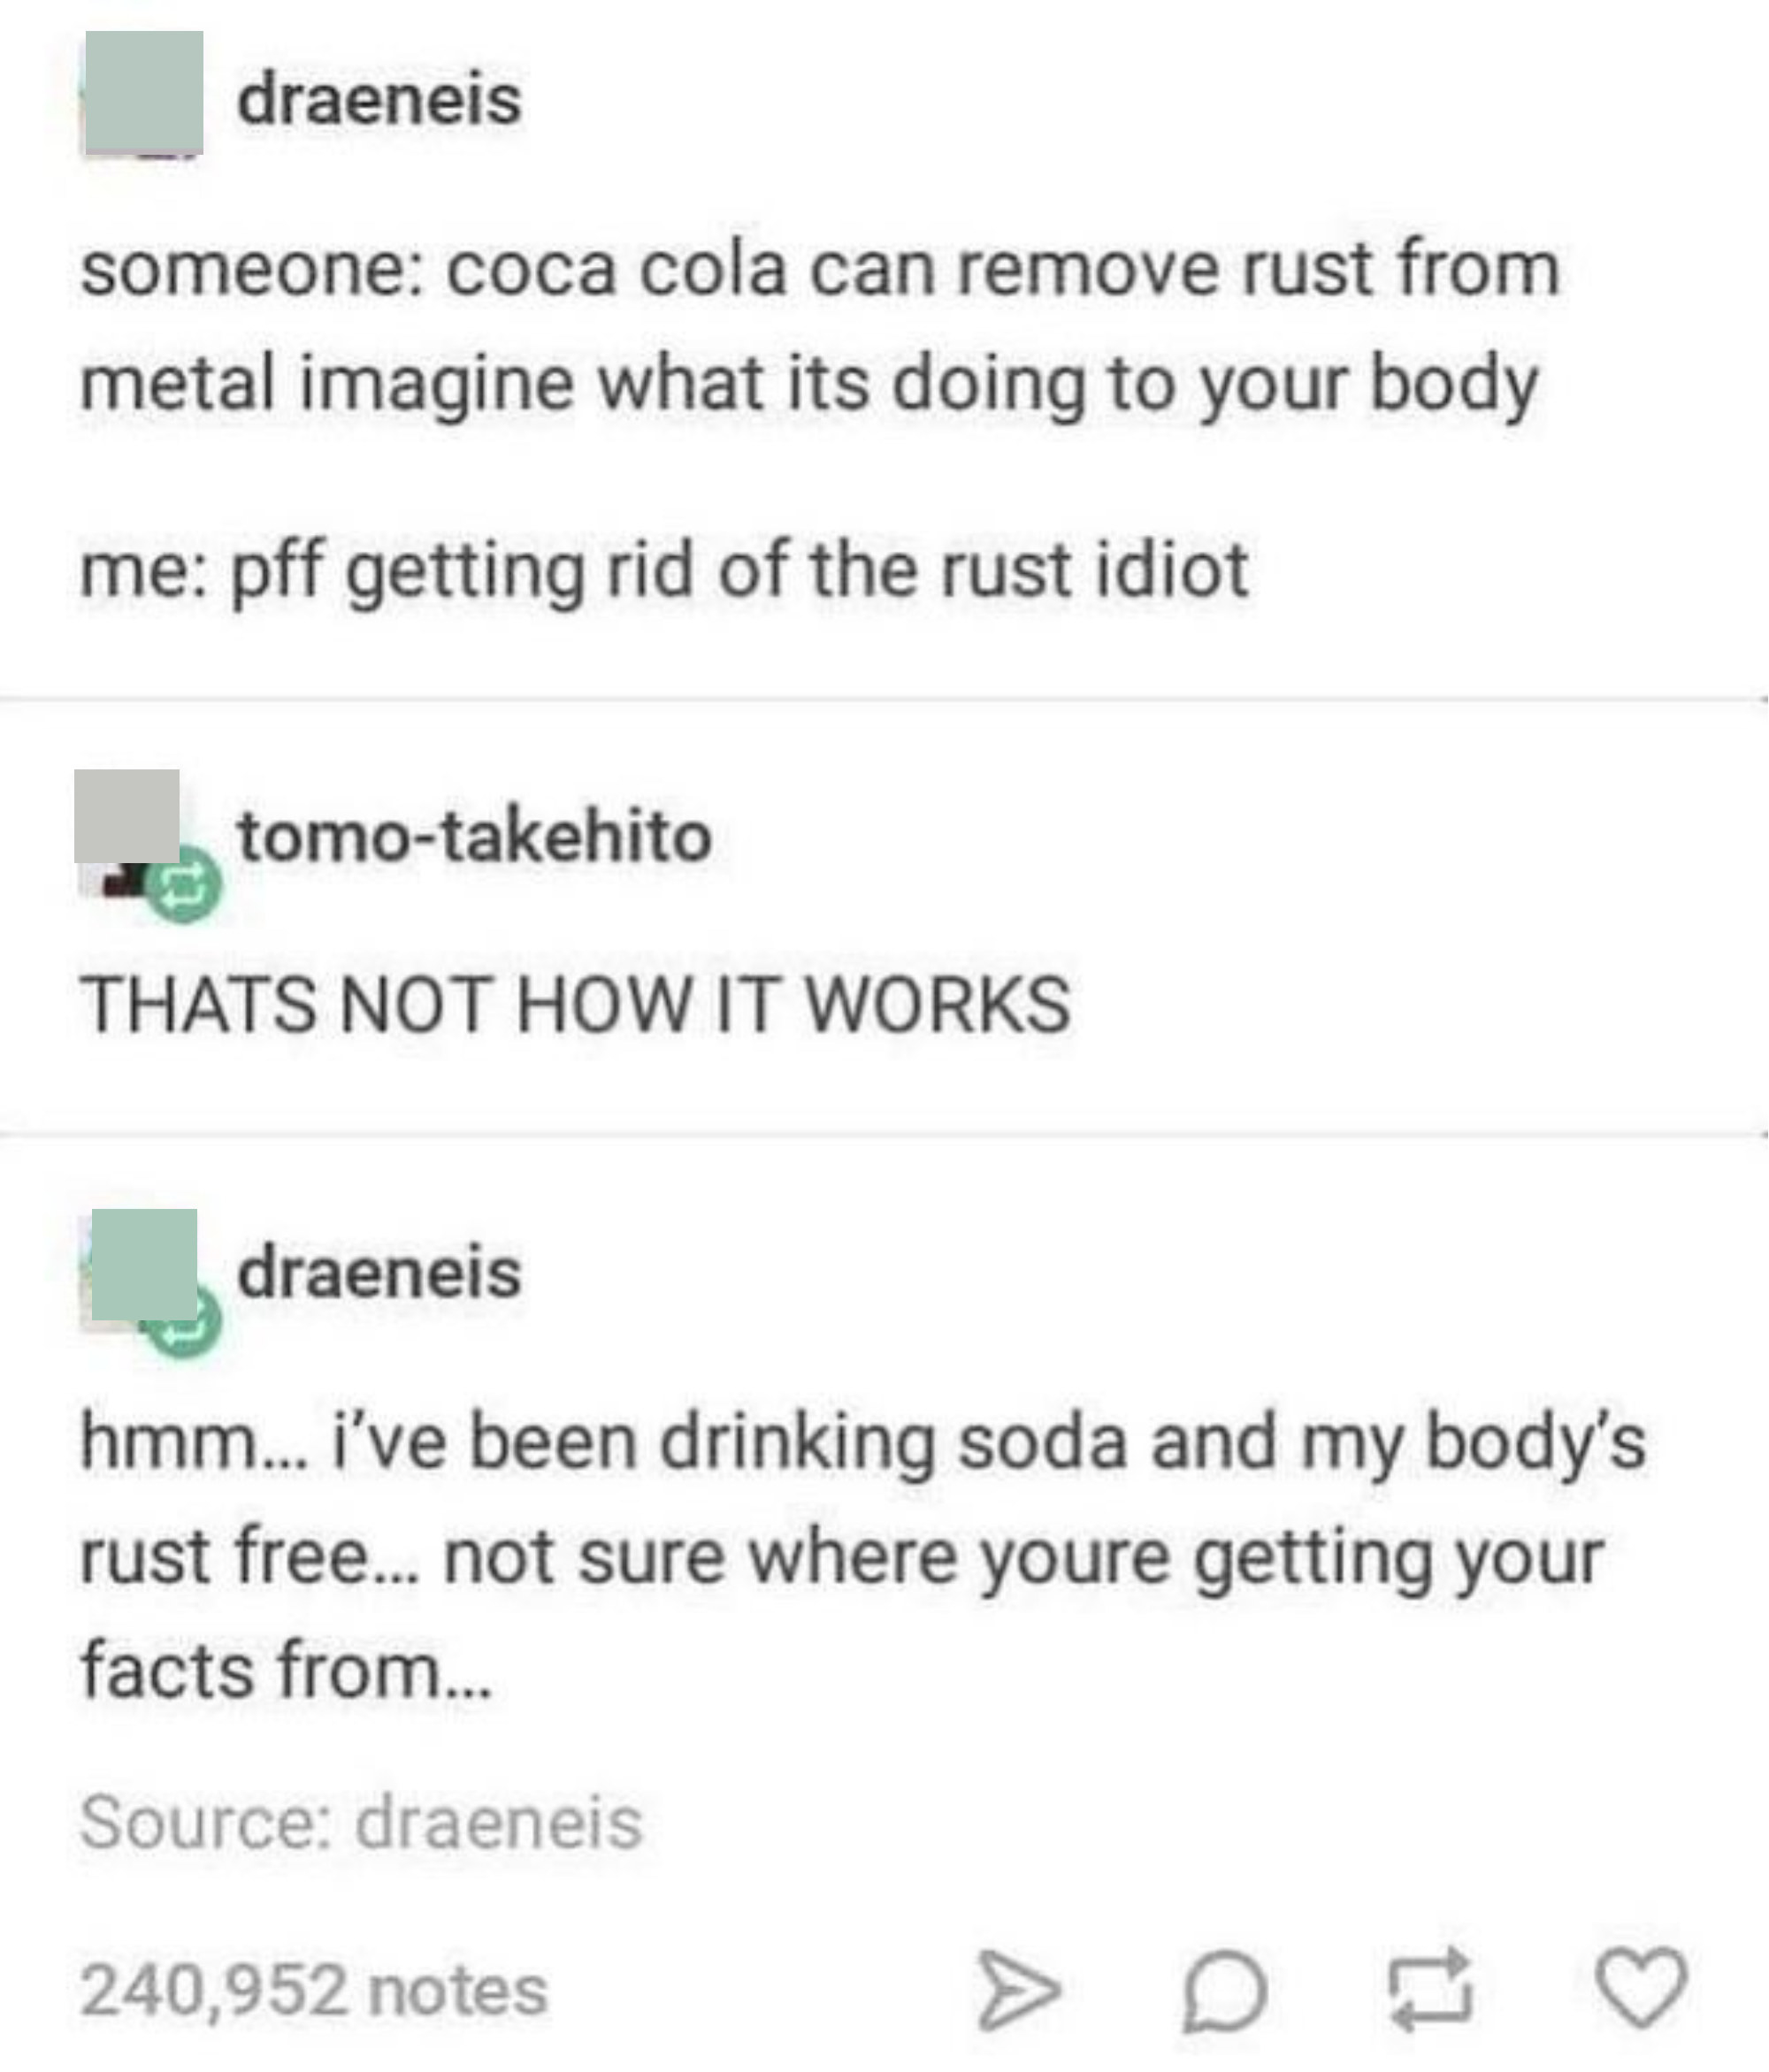 on coca cola cleaning off rust someone says, i&#x27;ve been drinking soda and my body&#x27;s rust free